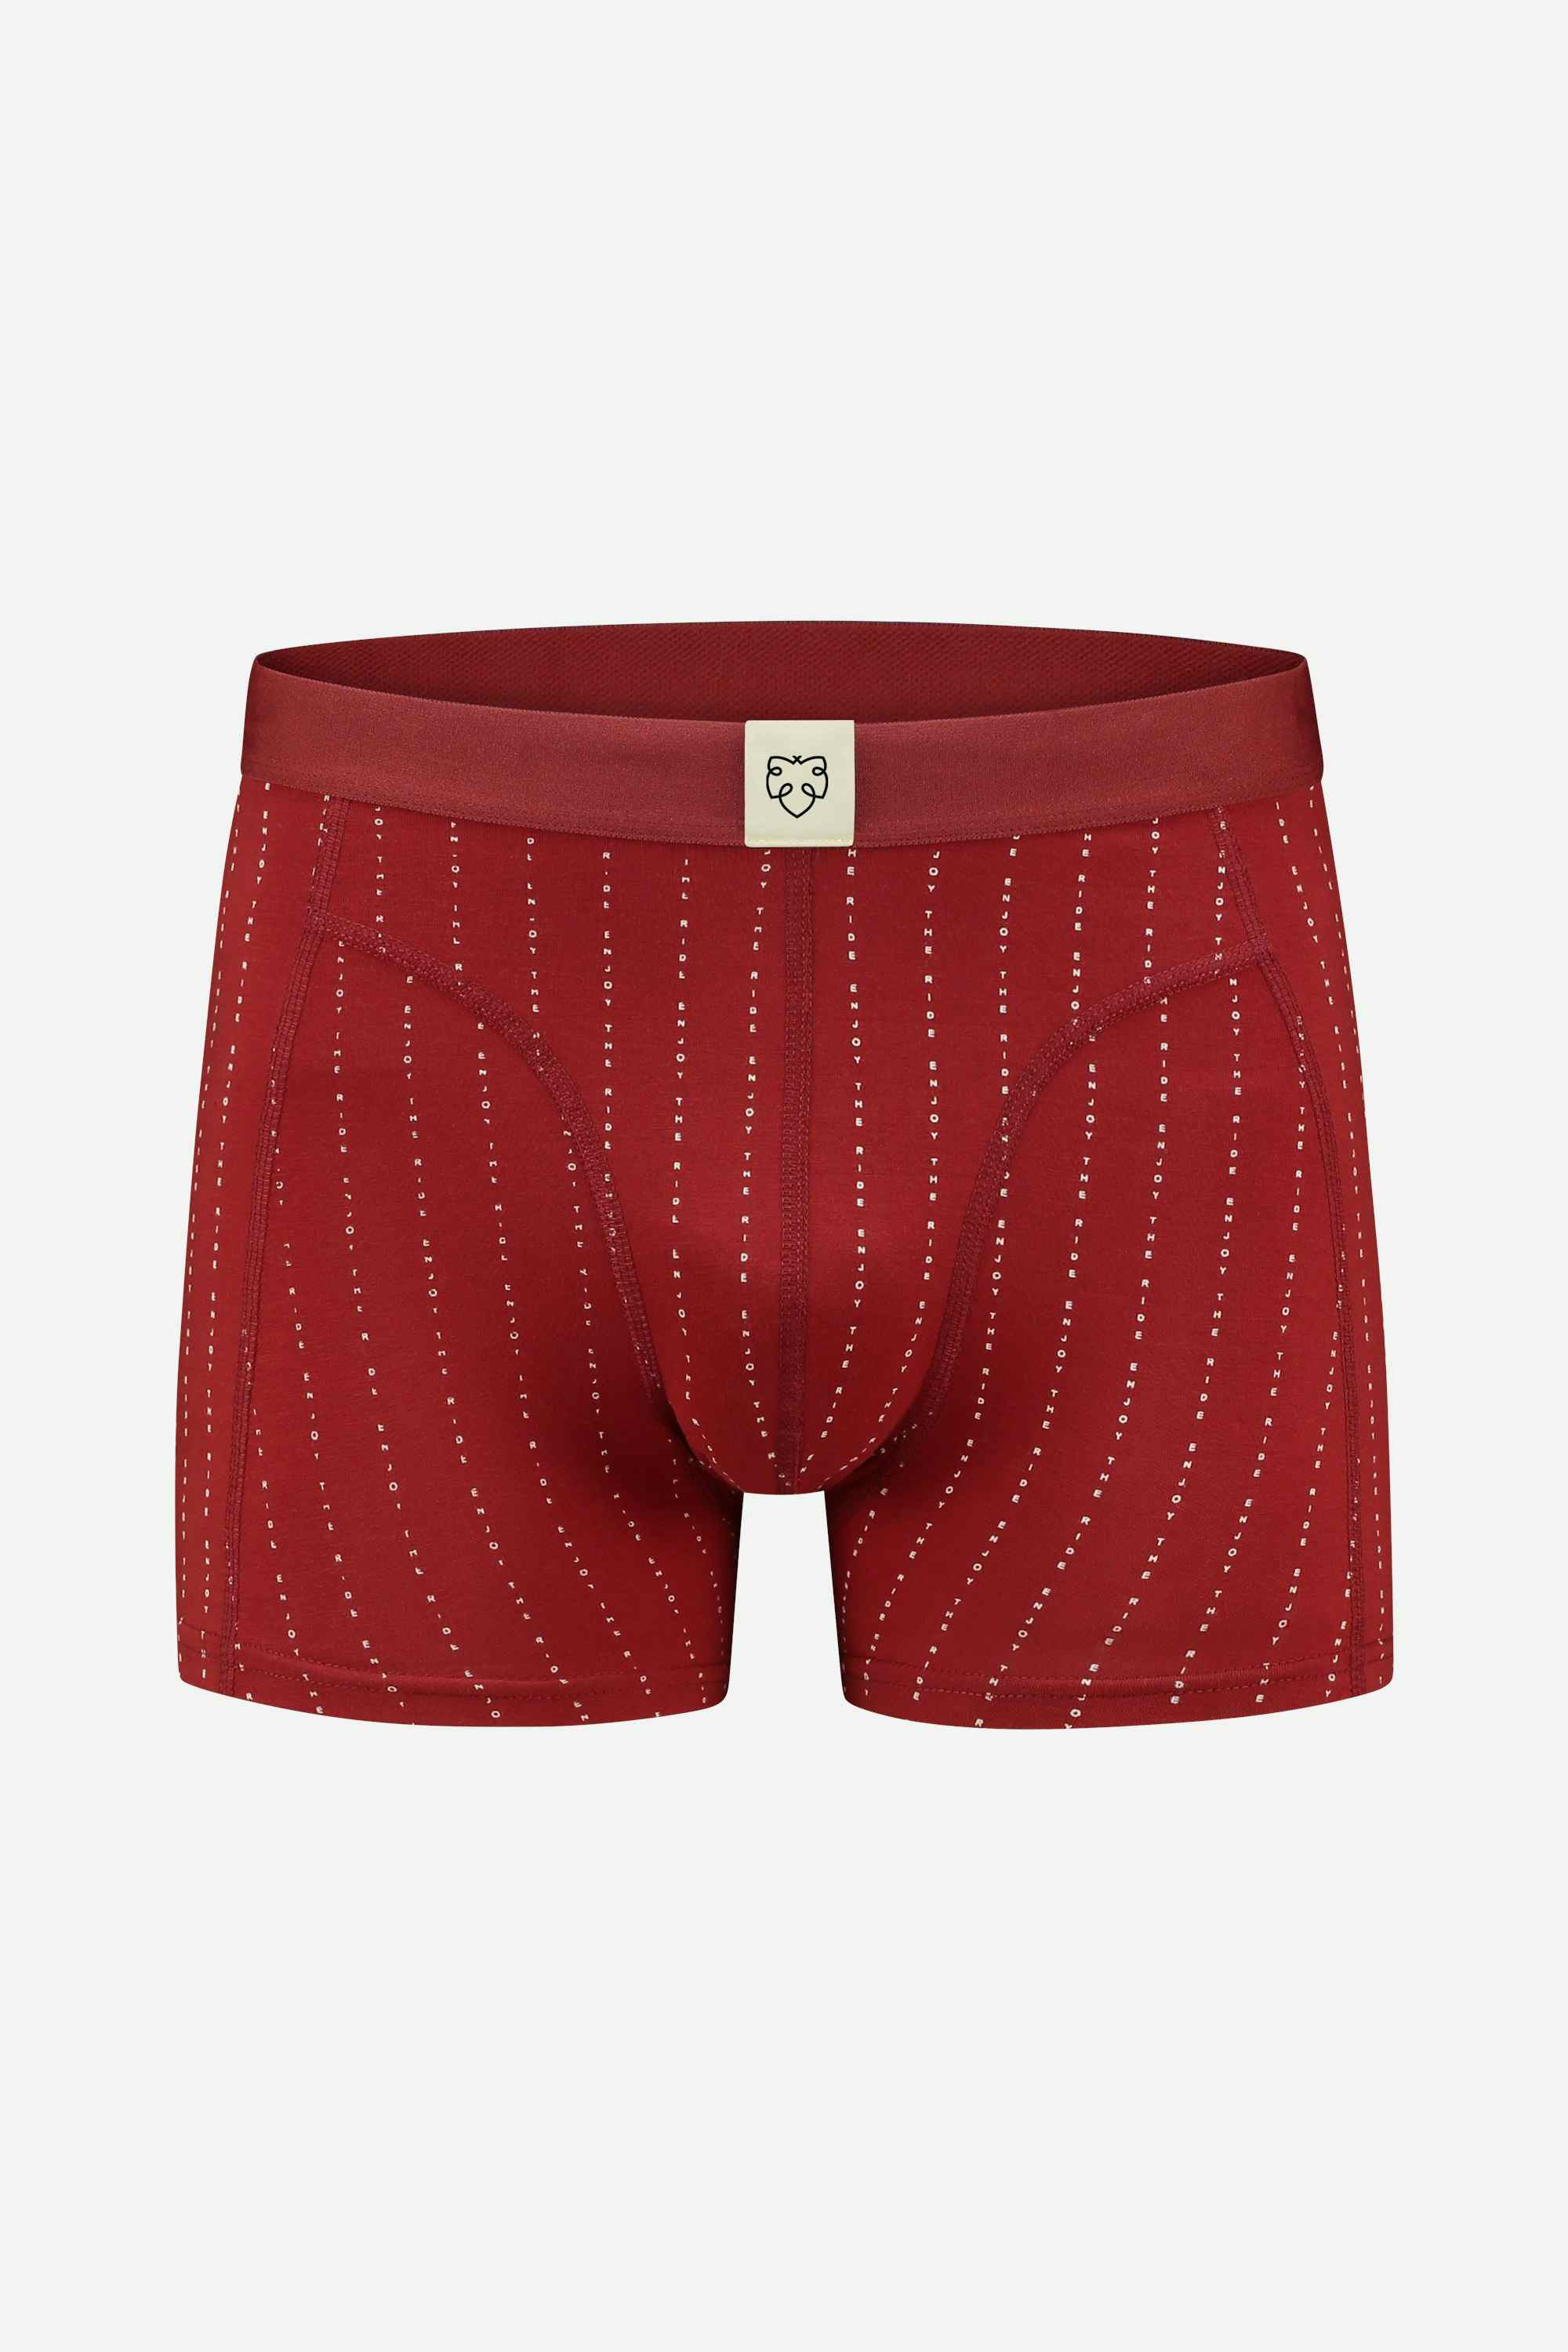 A-dam boxer brief with enjoy the ride from GOTS pure organic